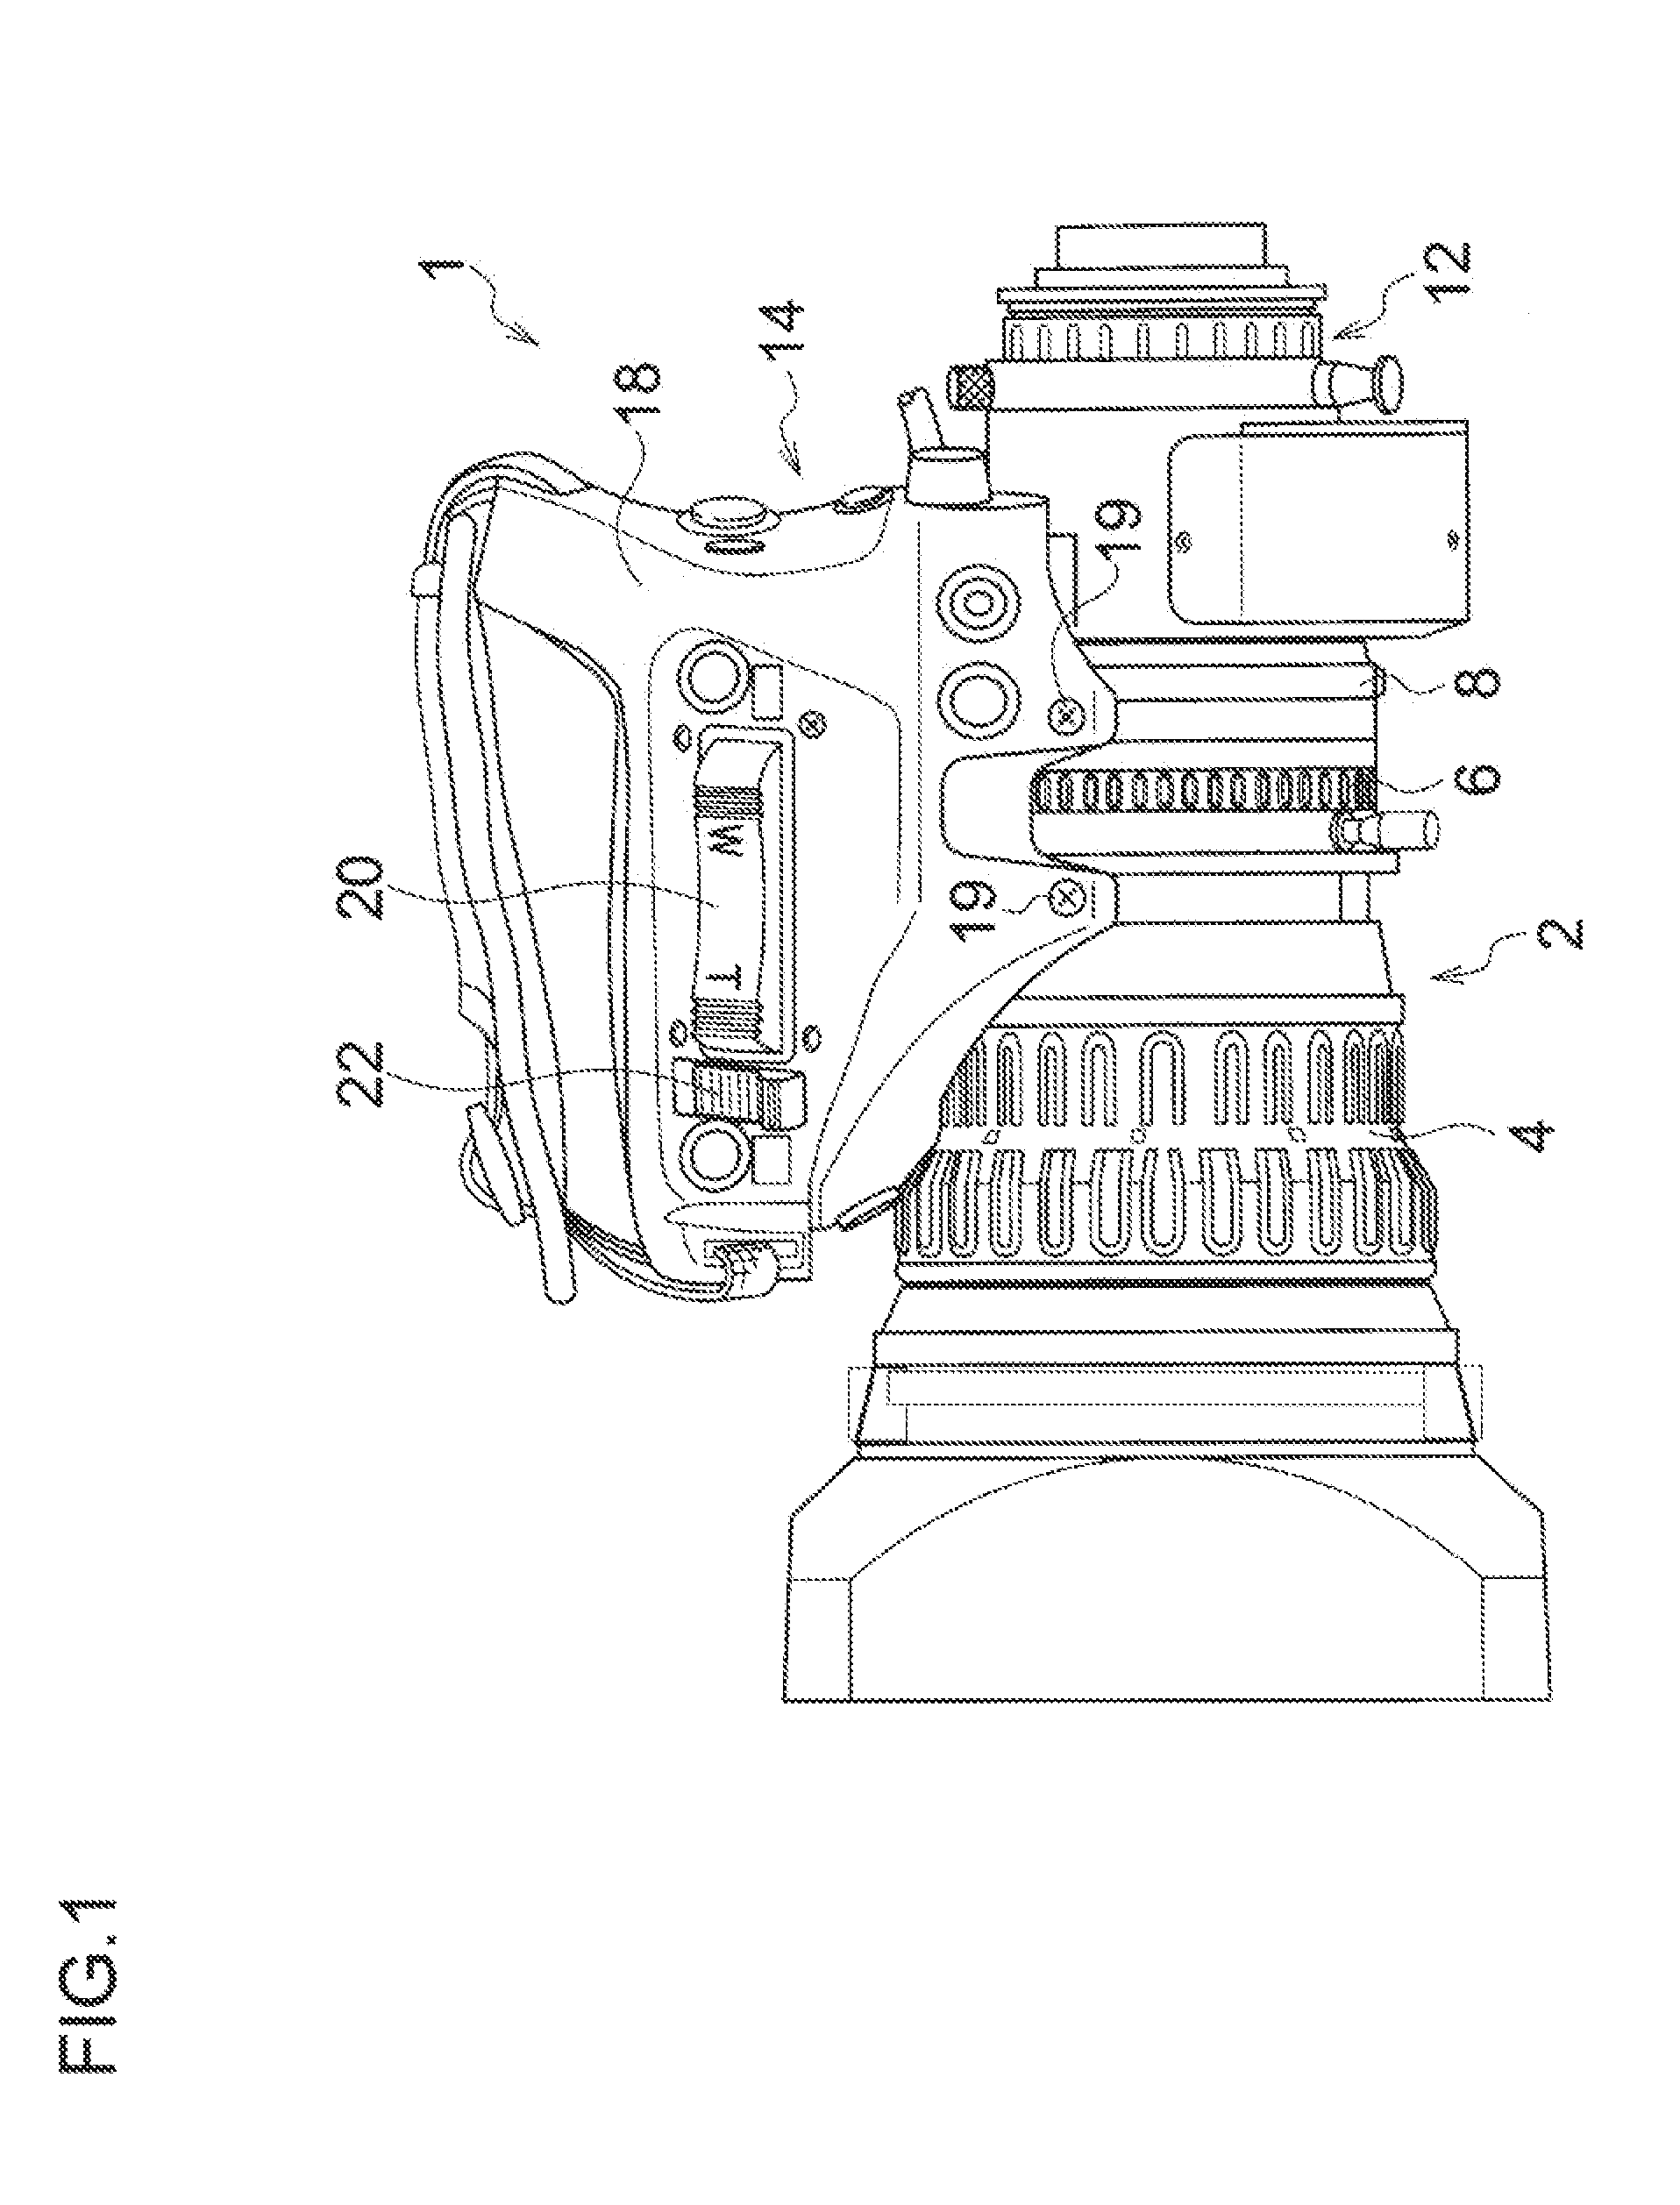 Device for changing operating force of lens device